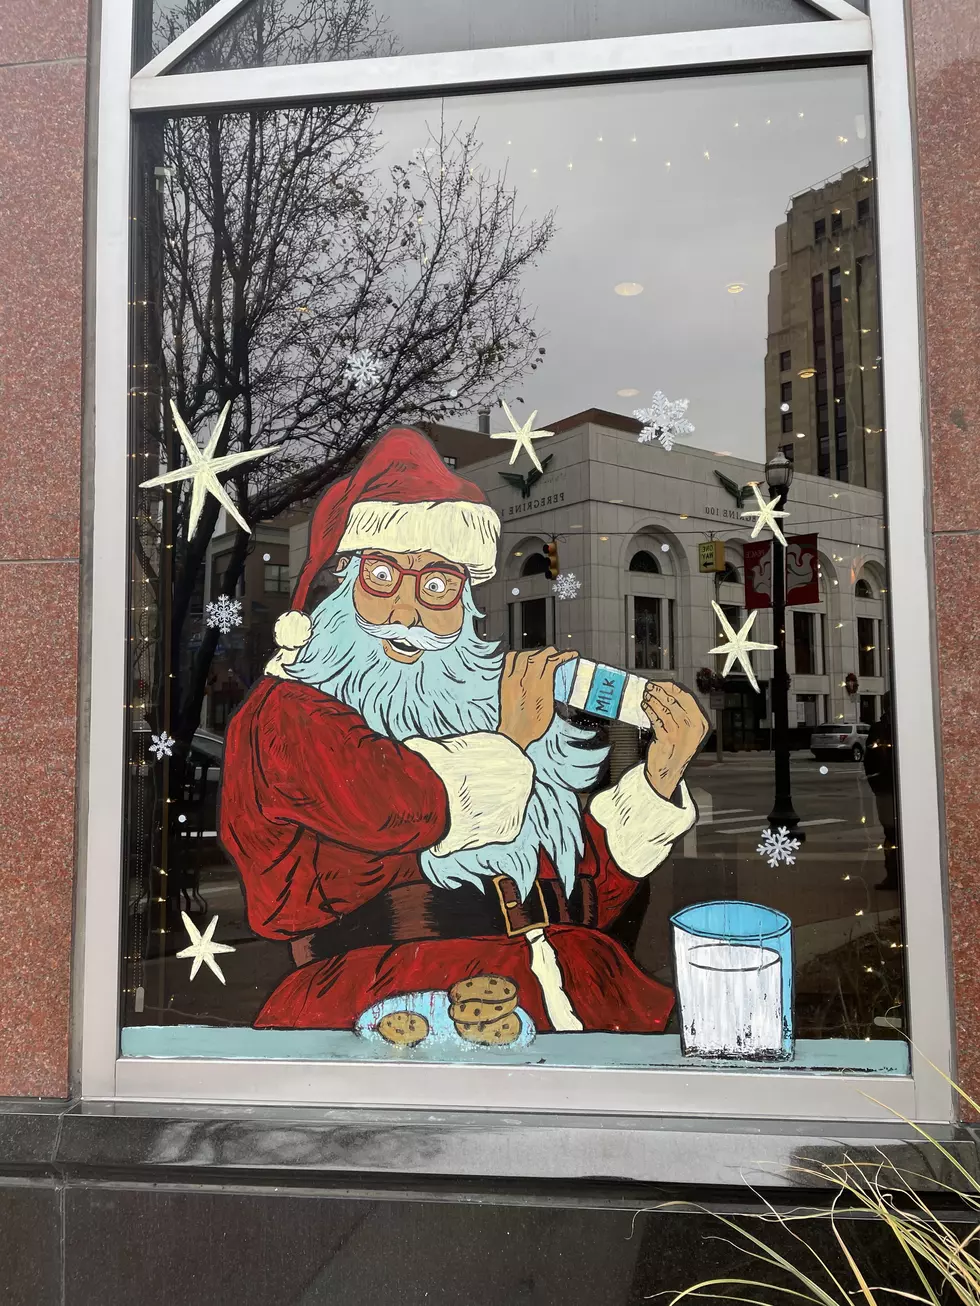 Holiday Displays in Downtown Kalamazoo – Who has the Best?